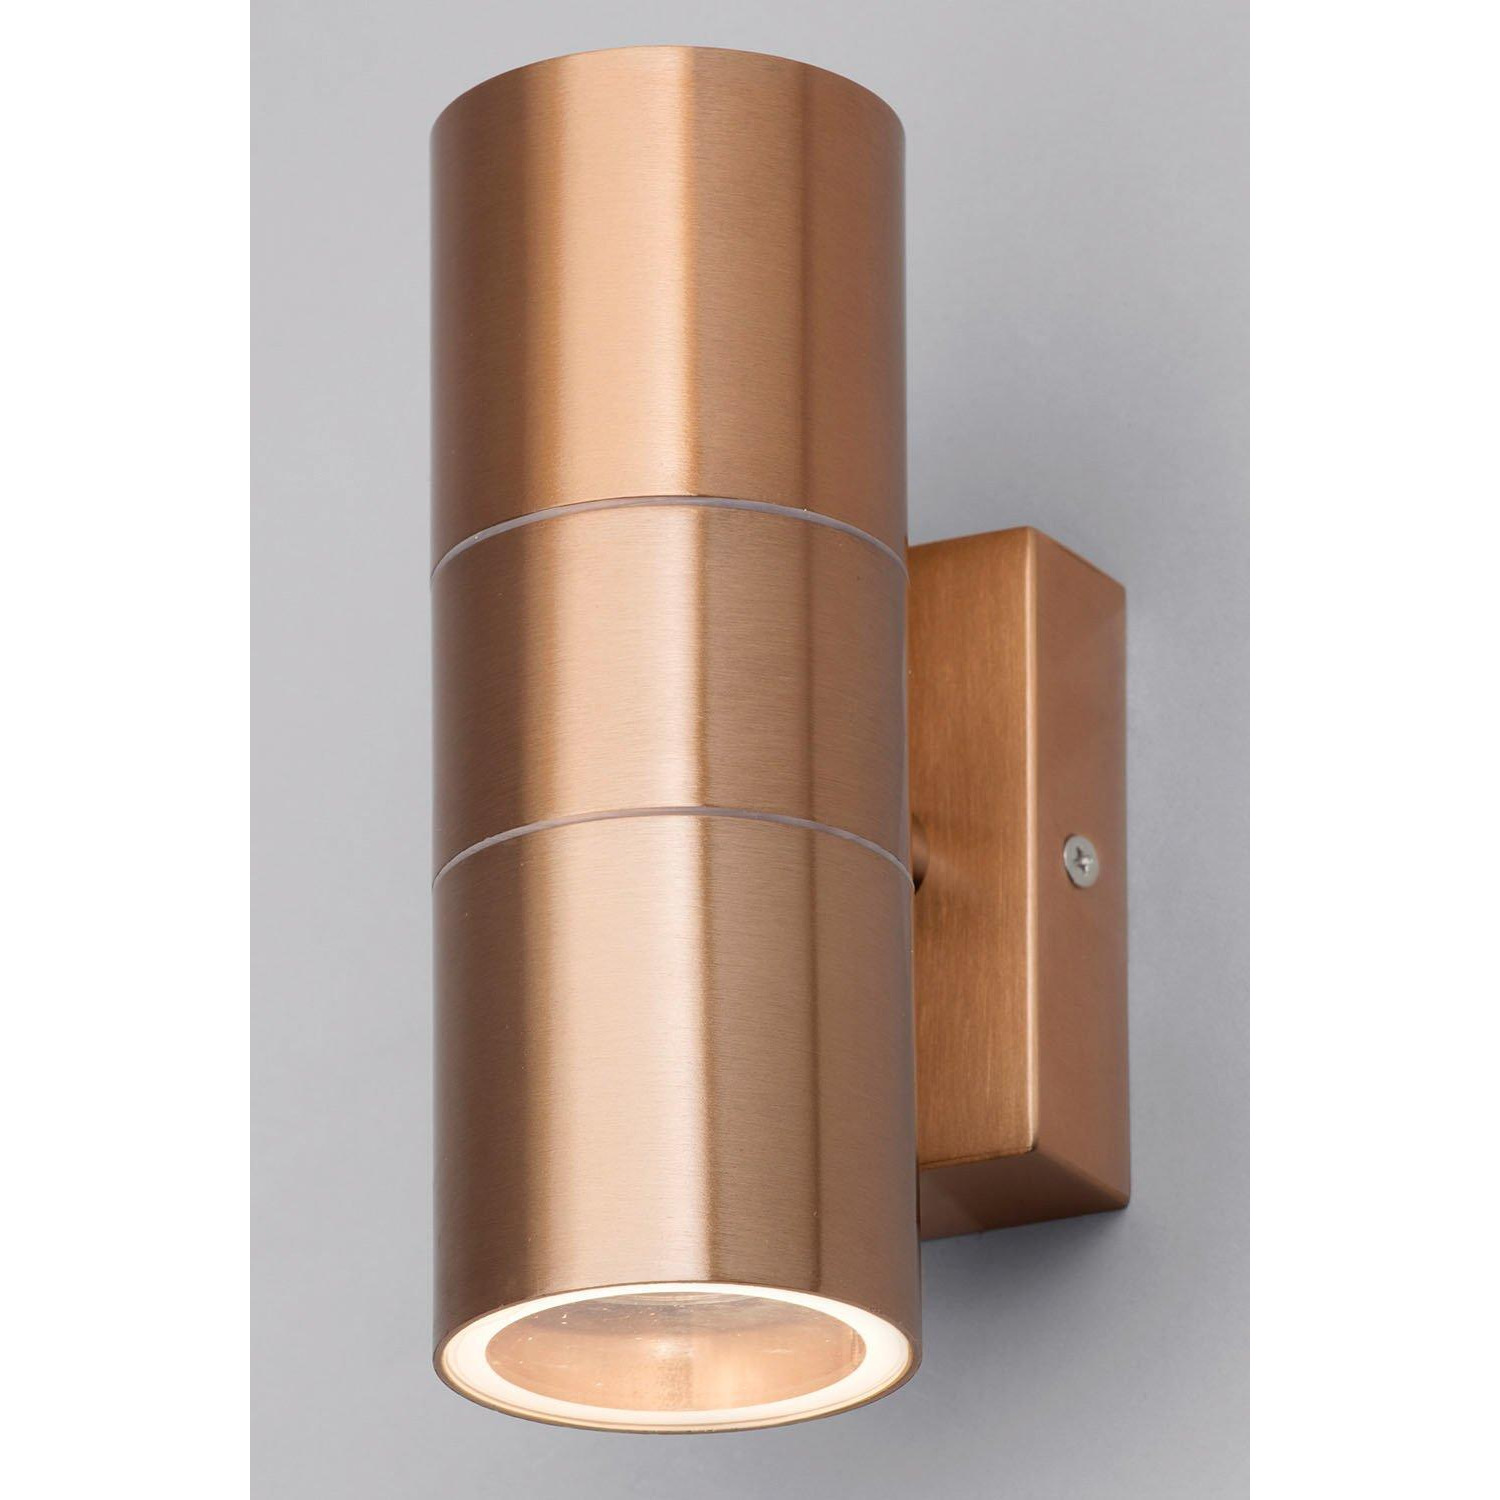 Jared Outdoor Wall Light - image 1